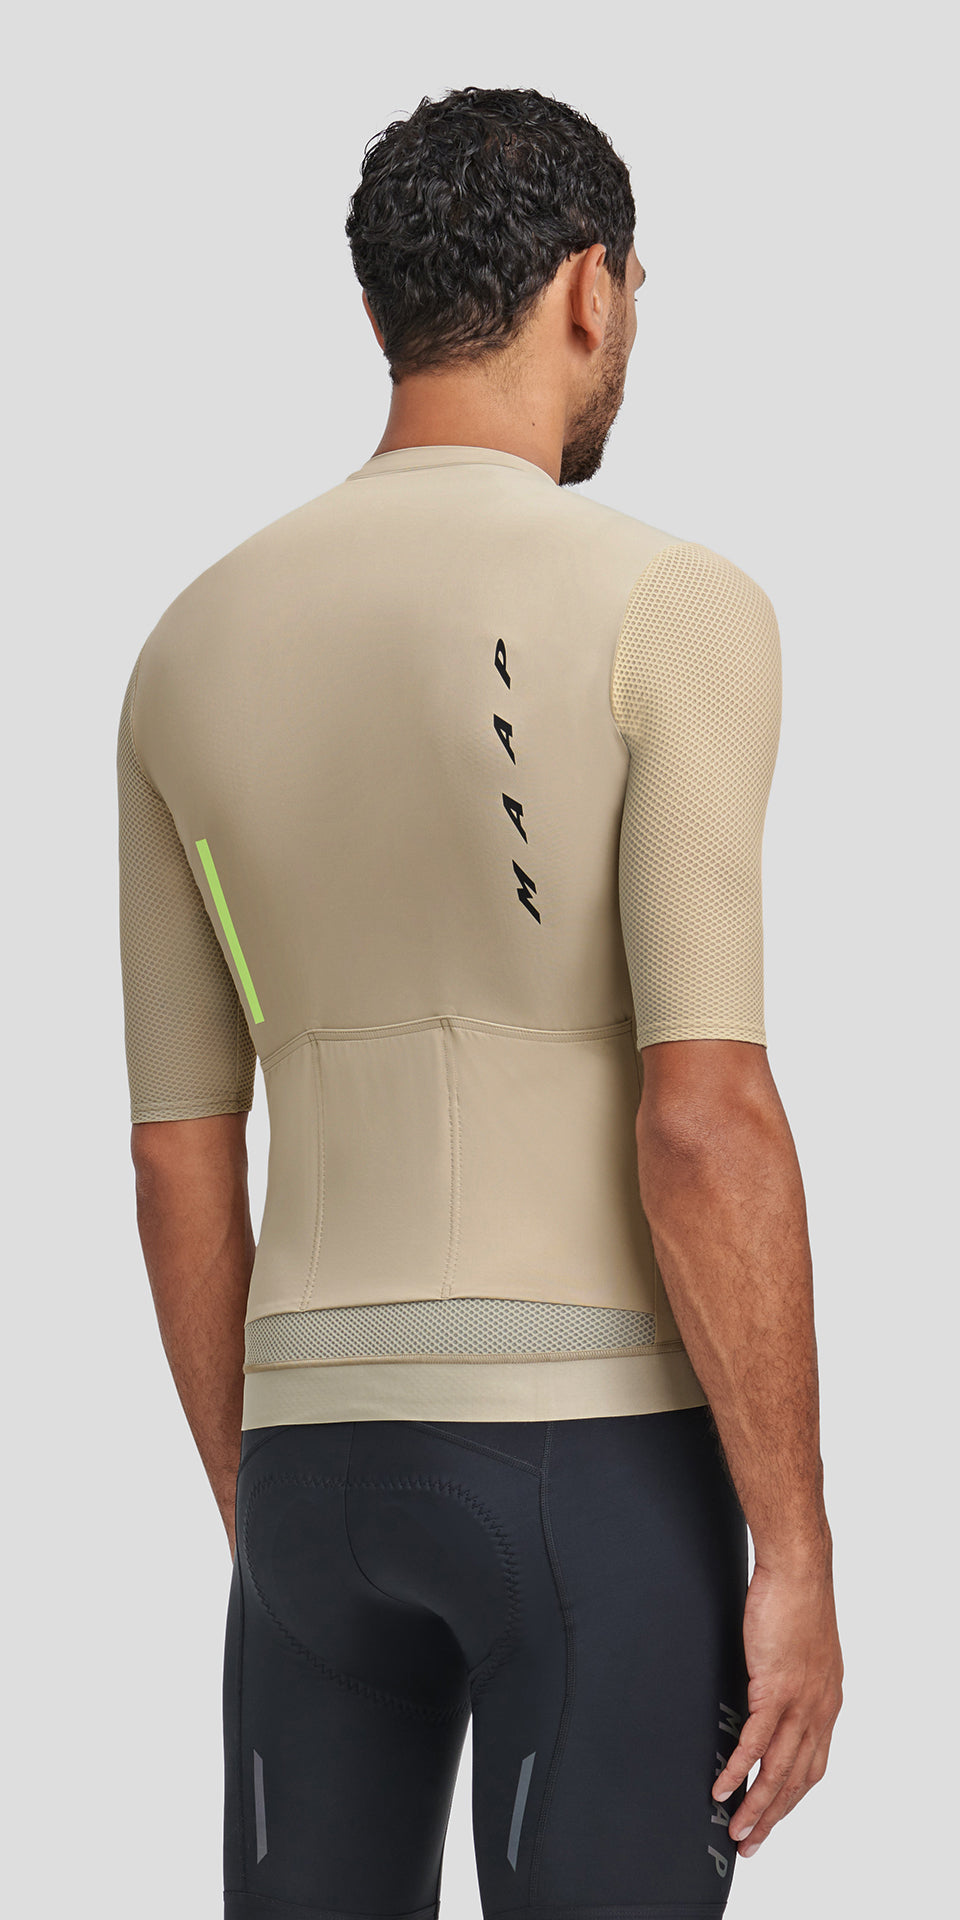 MAAP Evade Pro Base Jersey - Taupe